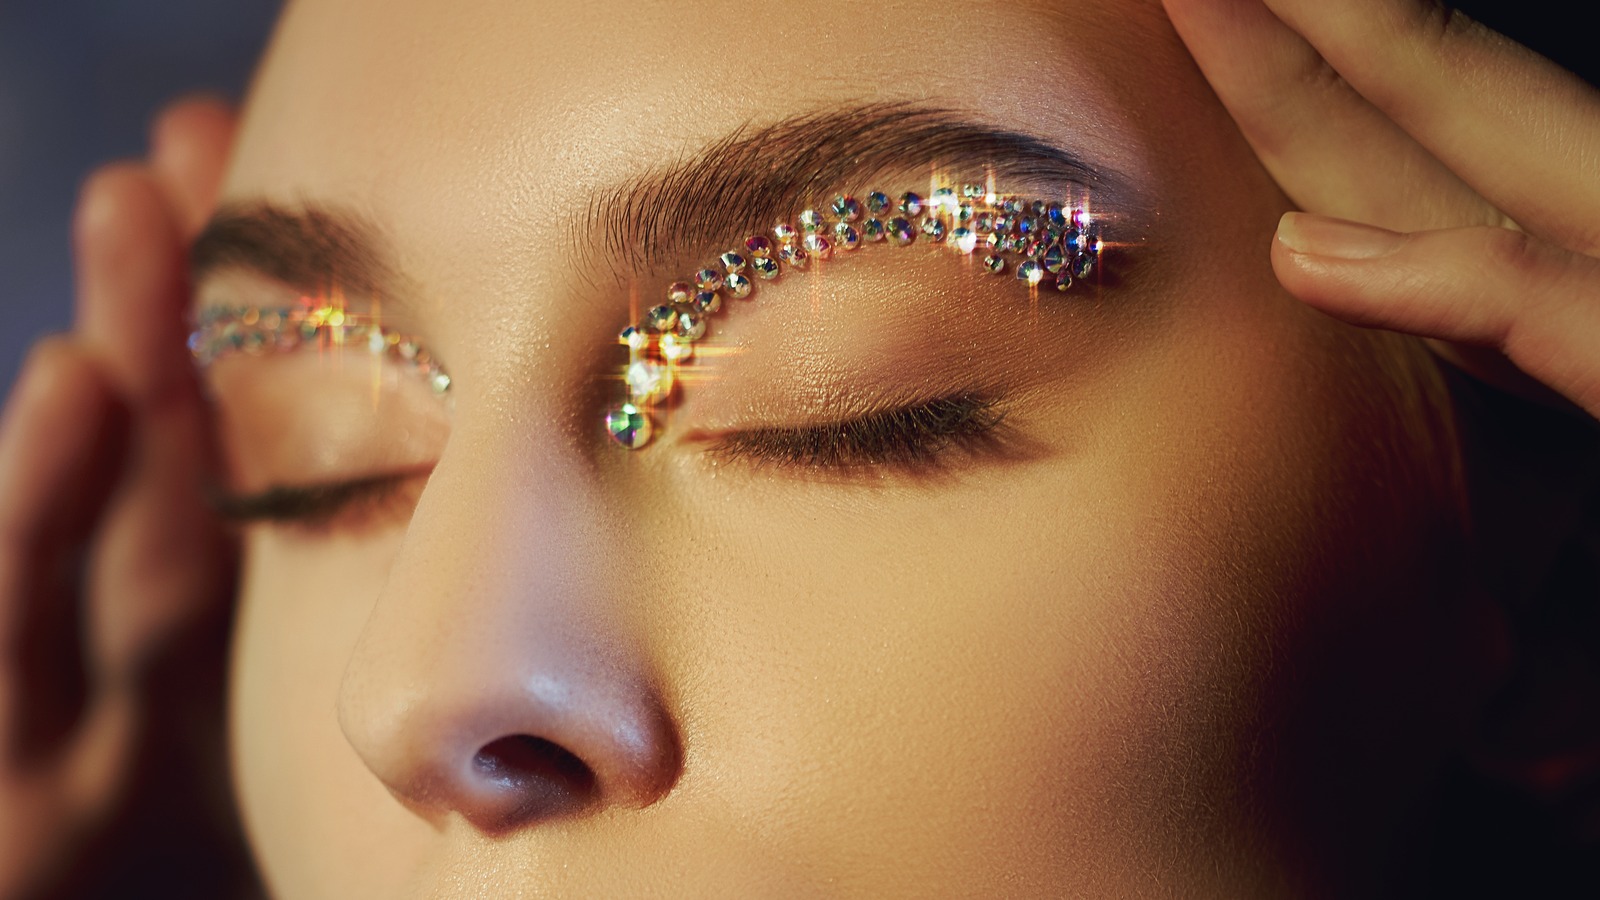 Face Jewel Makeup Ideas To Inspire Your Next Party Look